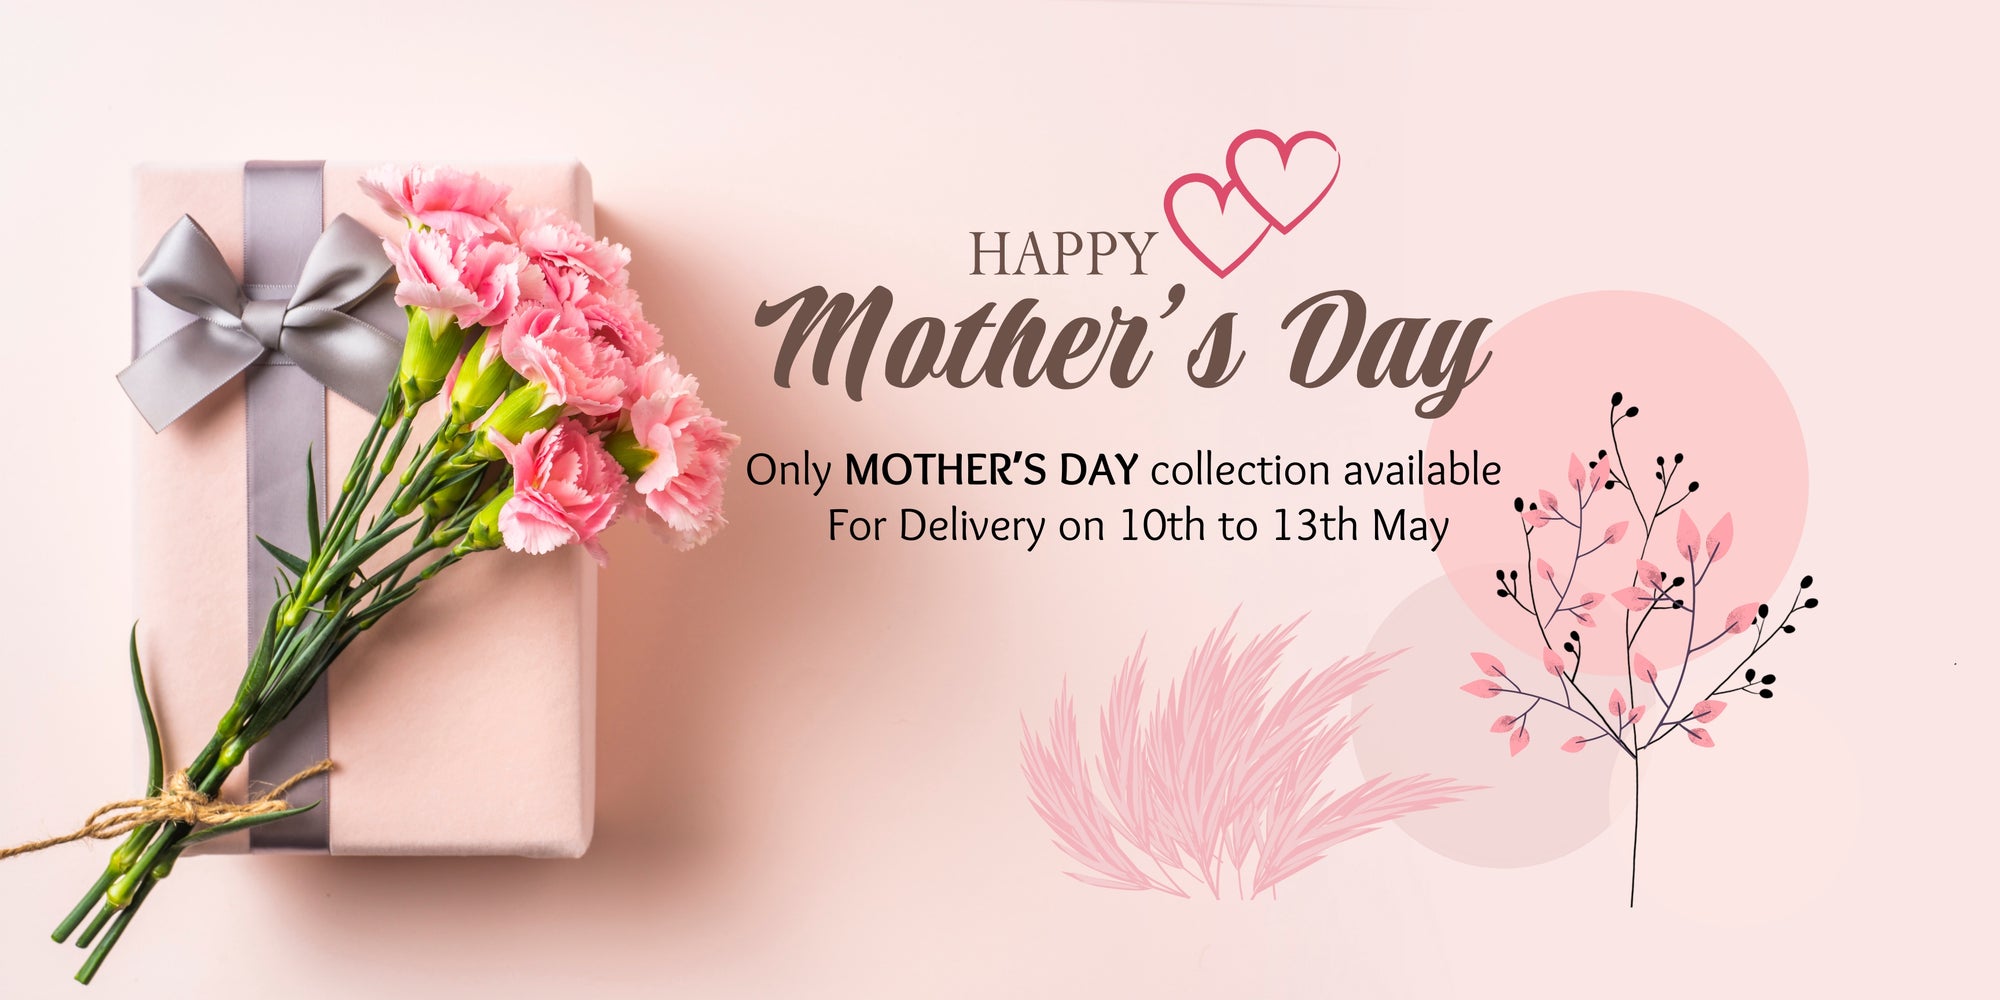 Mothers Day Flower - Mothers Day Flower Delivery Singapore - Well Live Florist